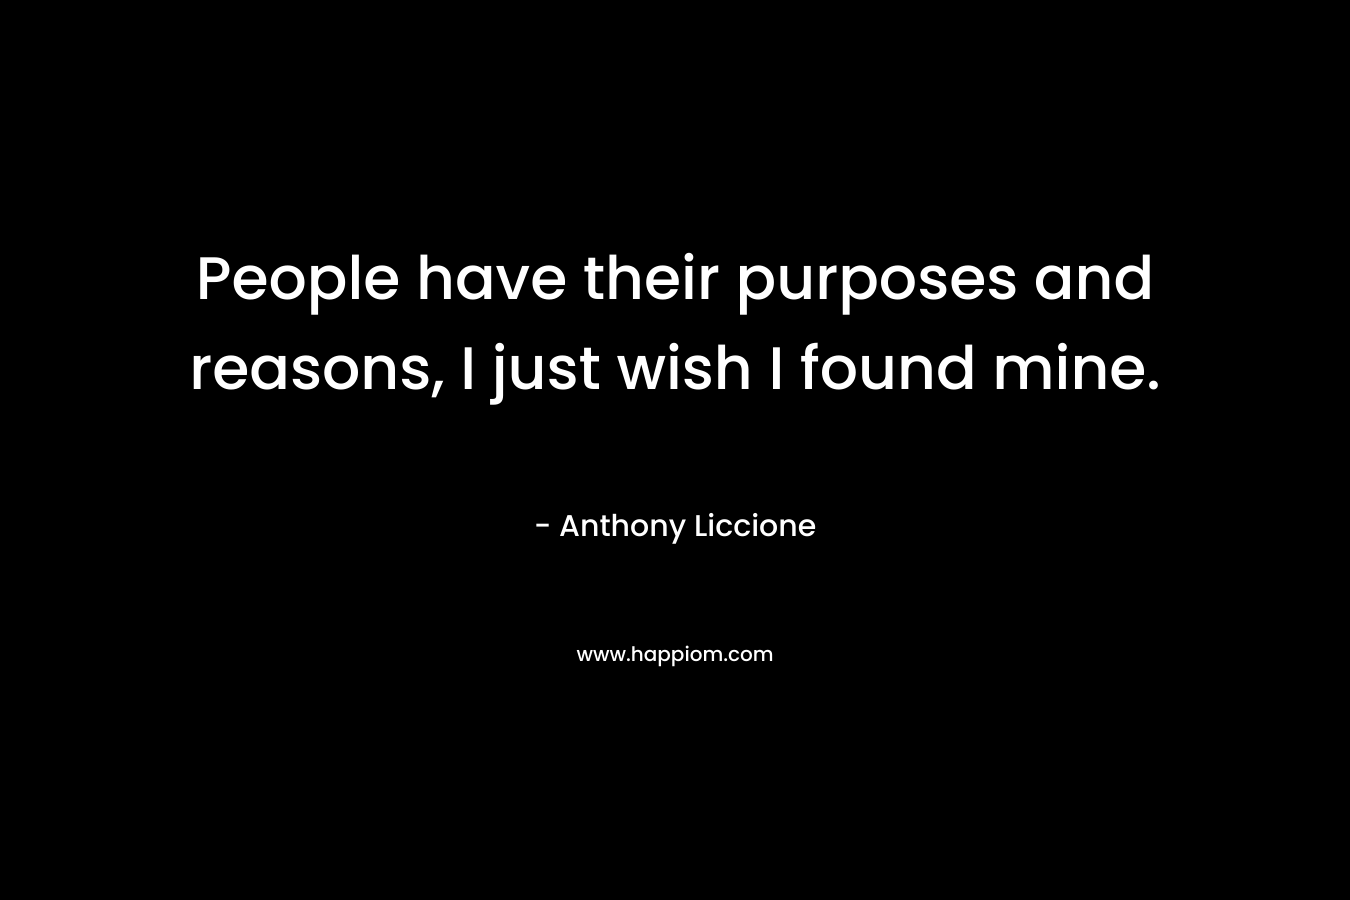 People have their purposes and reasons, I just wish I found mine. – Anthony Liccione